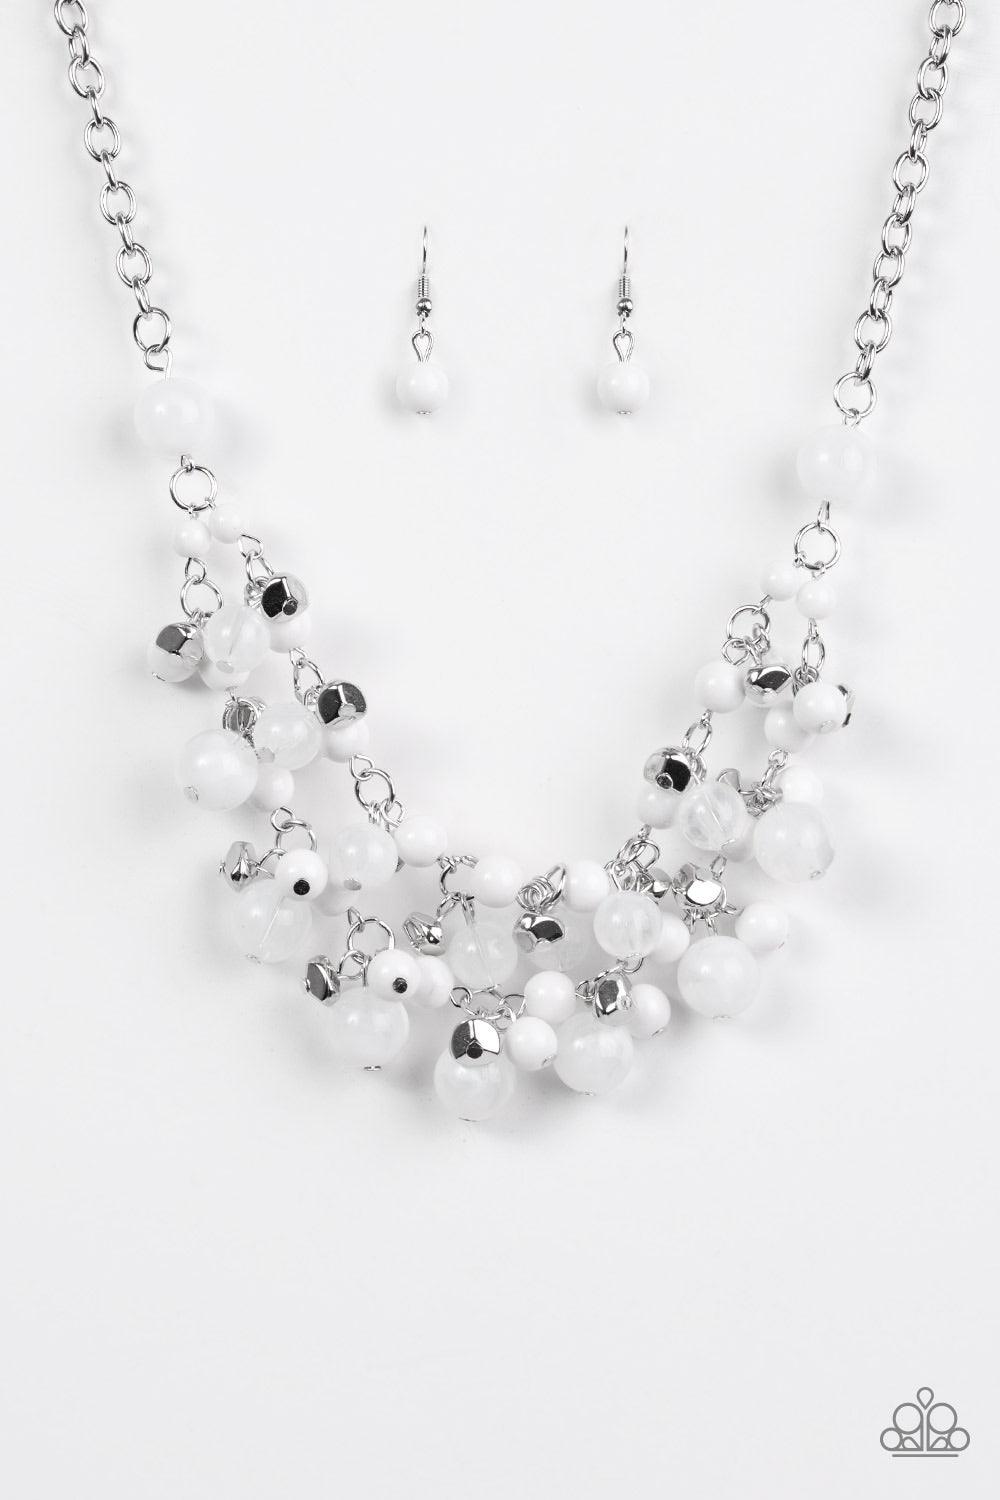 Paparazzi Accessories Gone Sailing - White Featuring polished and cloudy finishes, refreshing white beads drip from the bottom of two shimmery silver chains below the collar. Faceted silver beads trickle between the colorful accents, adding a splash of me